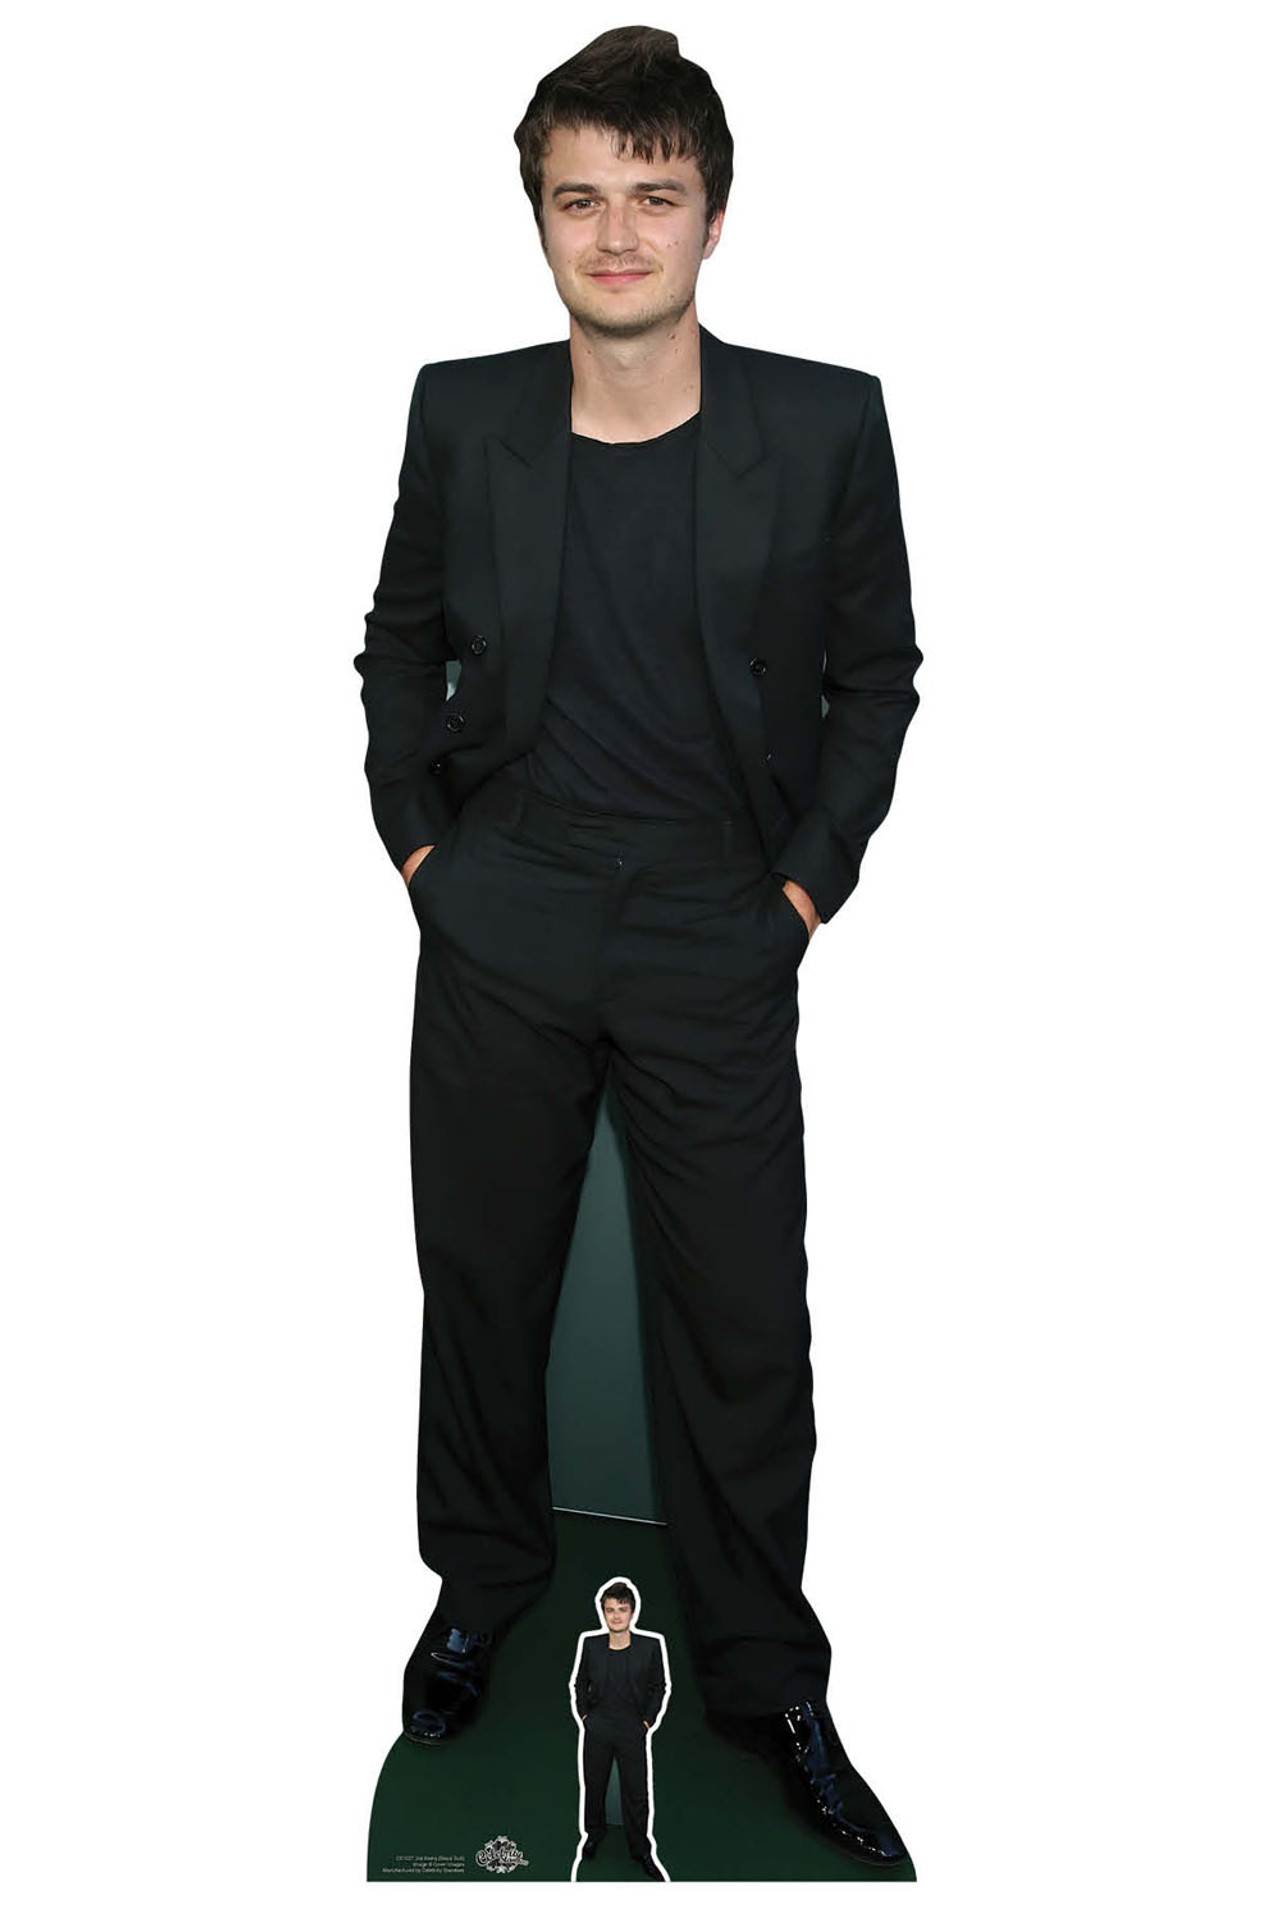 Celebrity Cardboard Cutouts, Standees and Standups Available now at ...